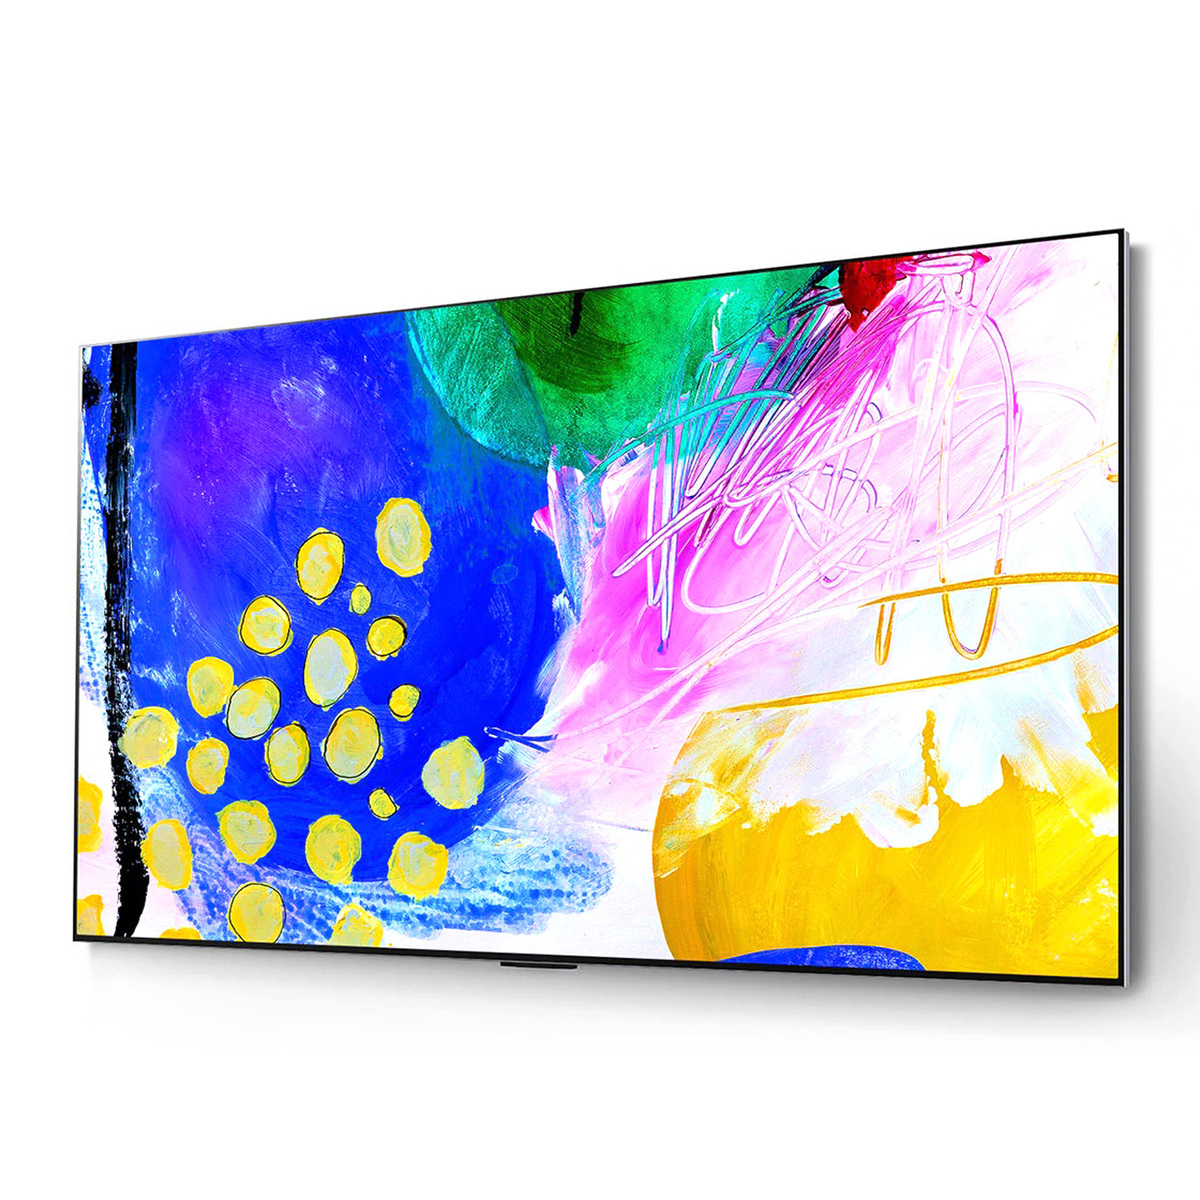 LG OLED evo TV 65 Inch G2 series, New 2022, Gallery Design 4K Cinema HDR webOS22 with ThinQ AI Pixel Dimming - OLED65G26LA